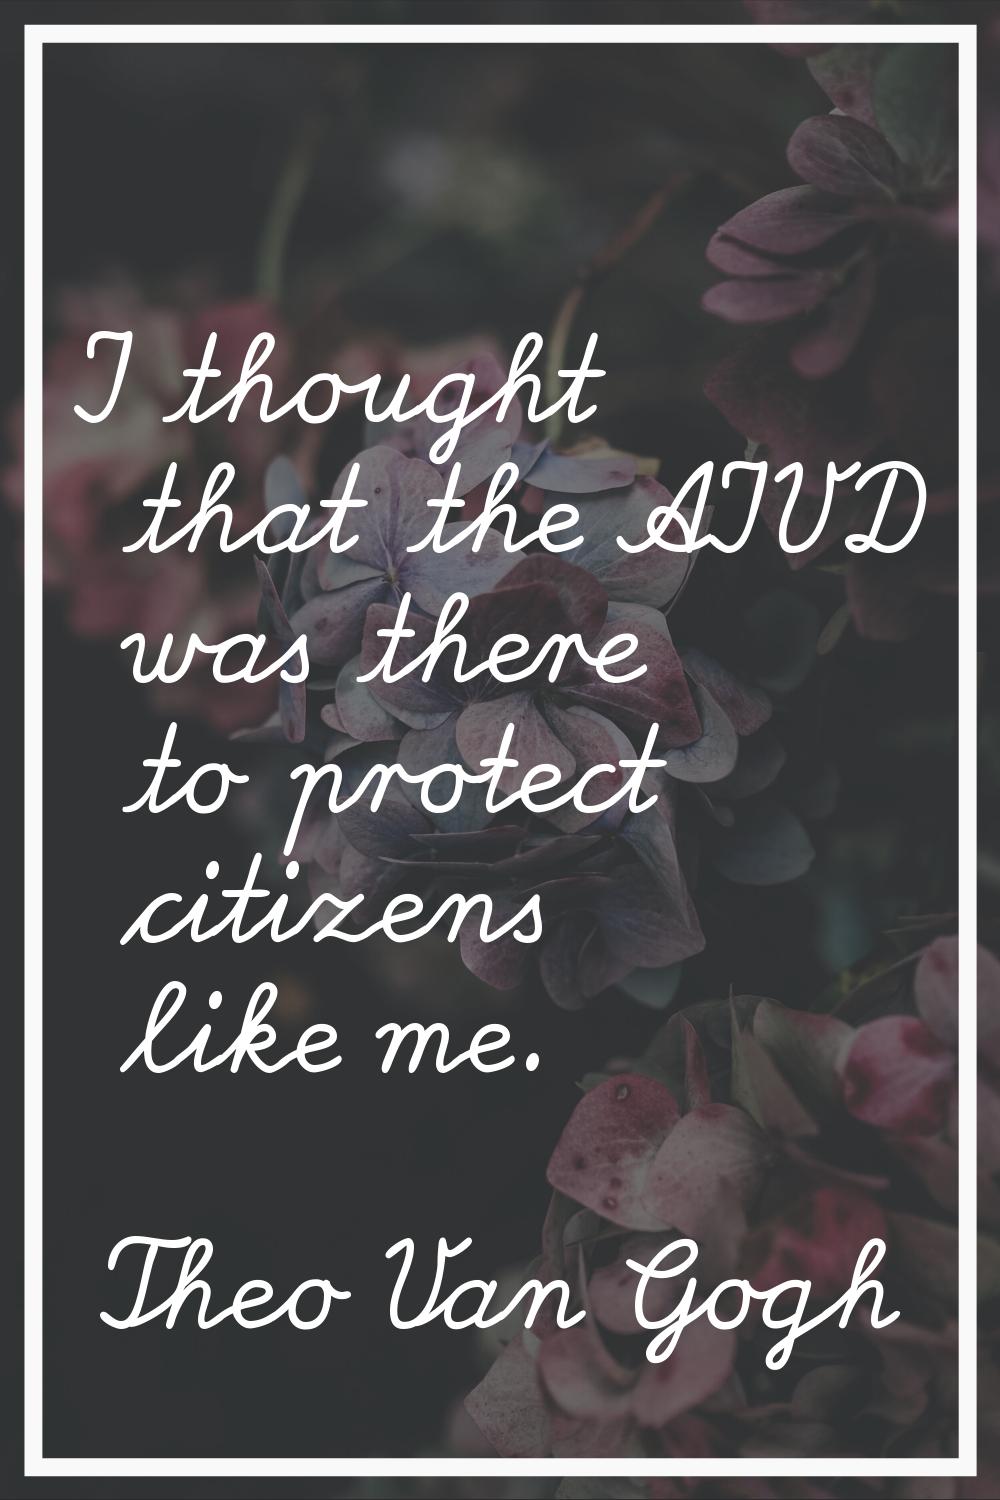 I thought that the AIVD was there to protect citizens like me.